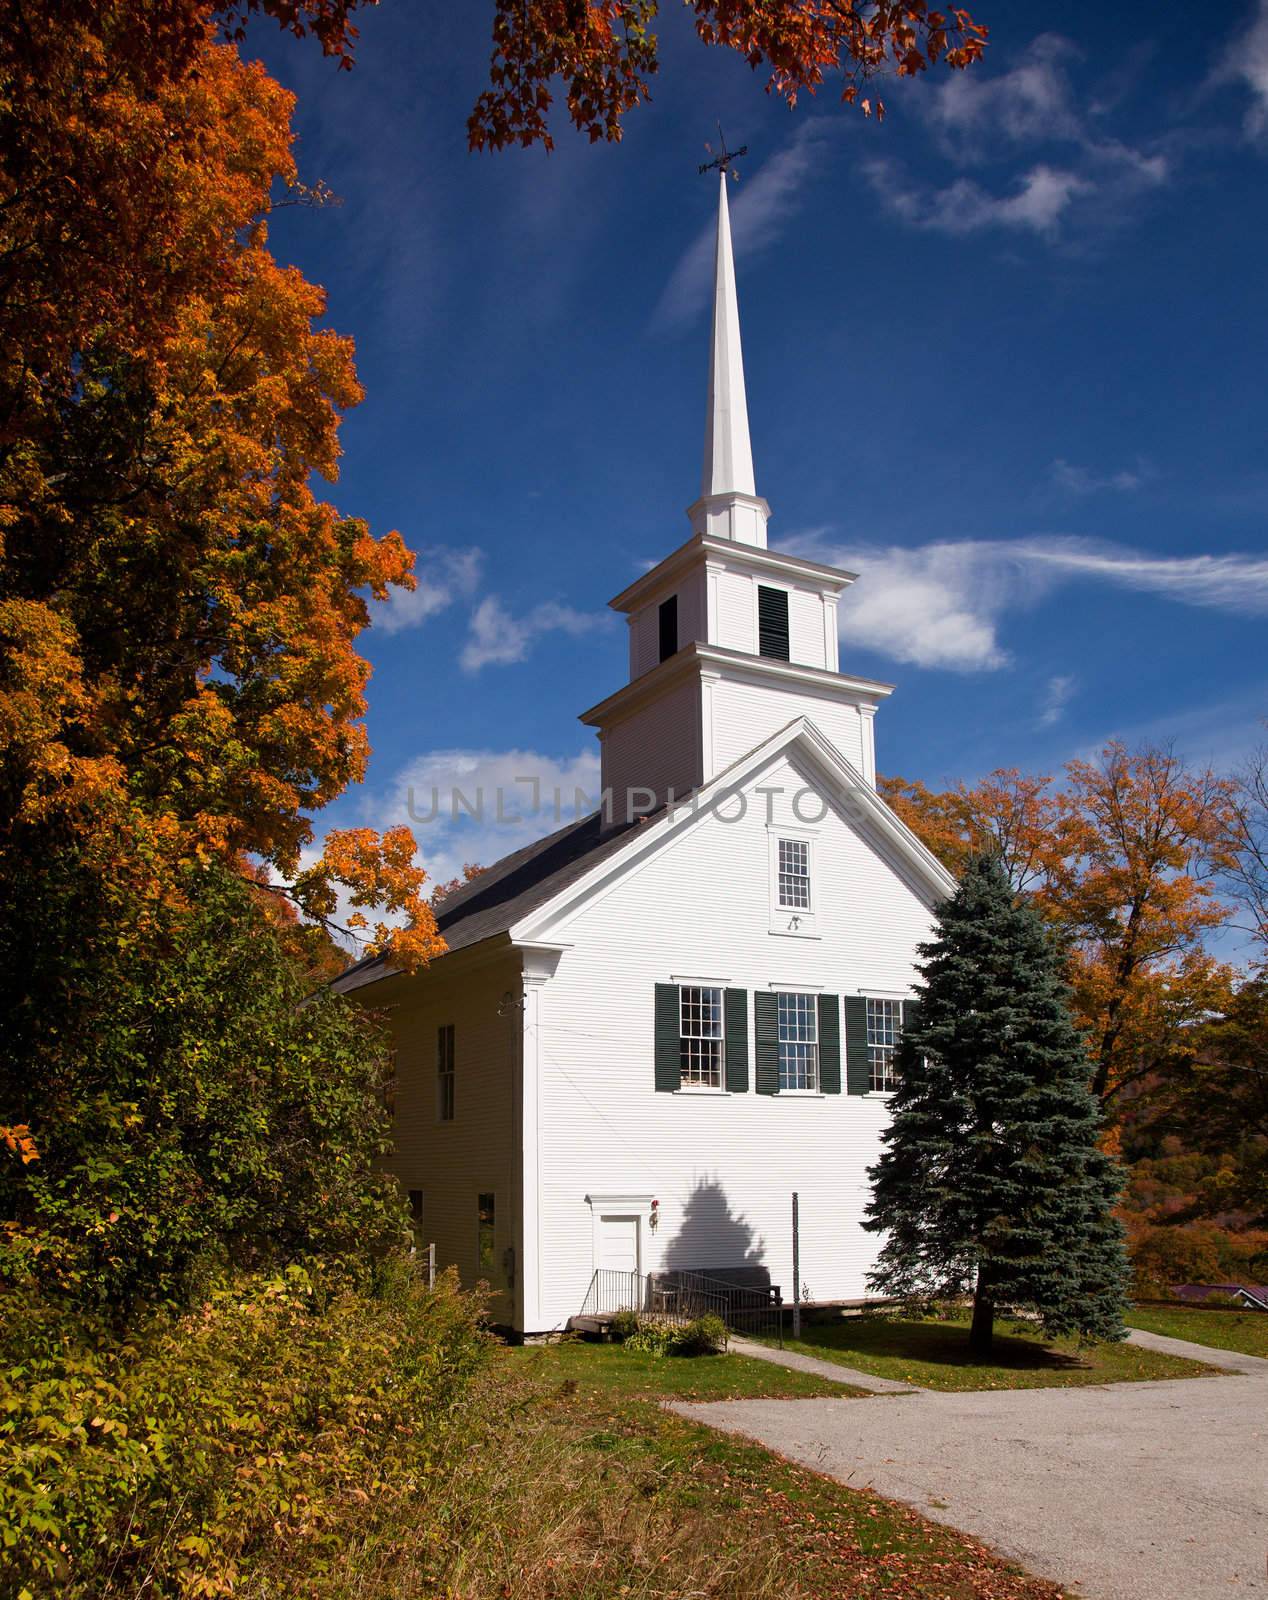 Autumnal shot of the typical Vermont church in fall as the bright trees turn orange and red